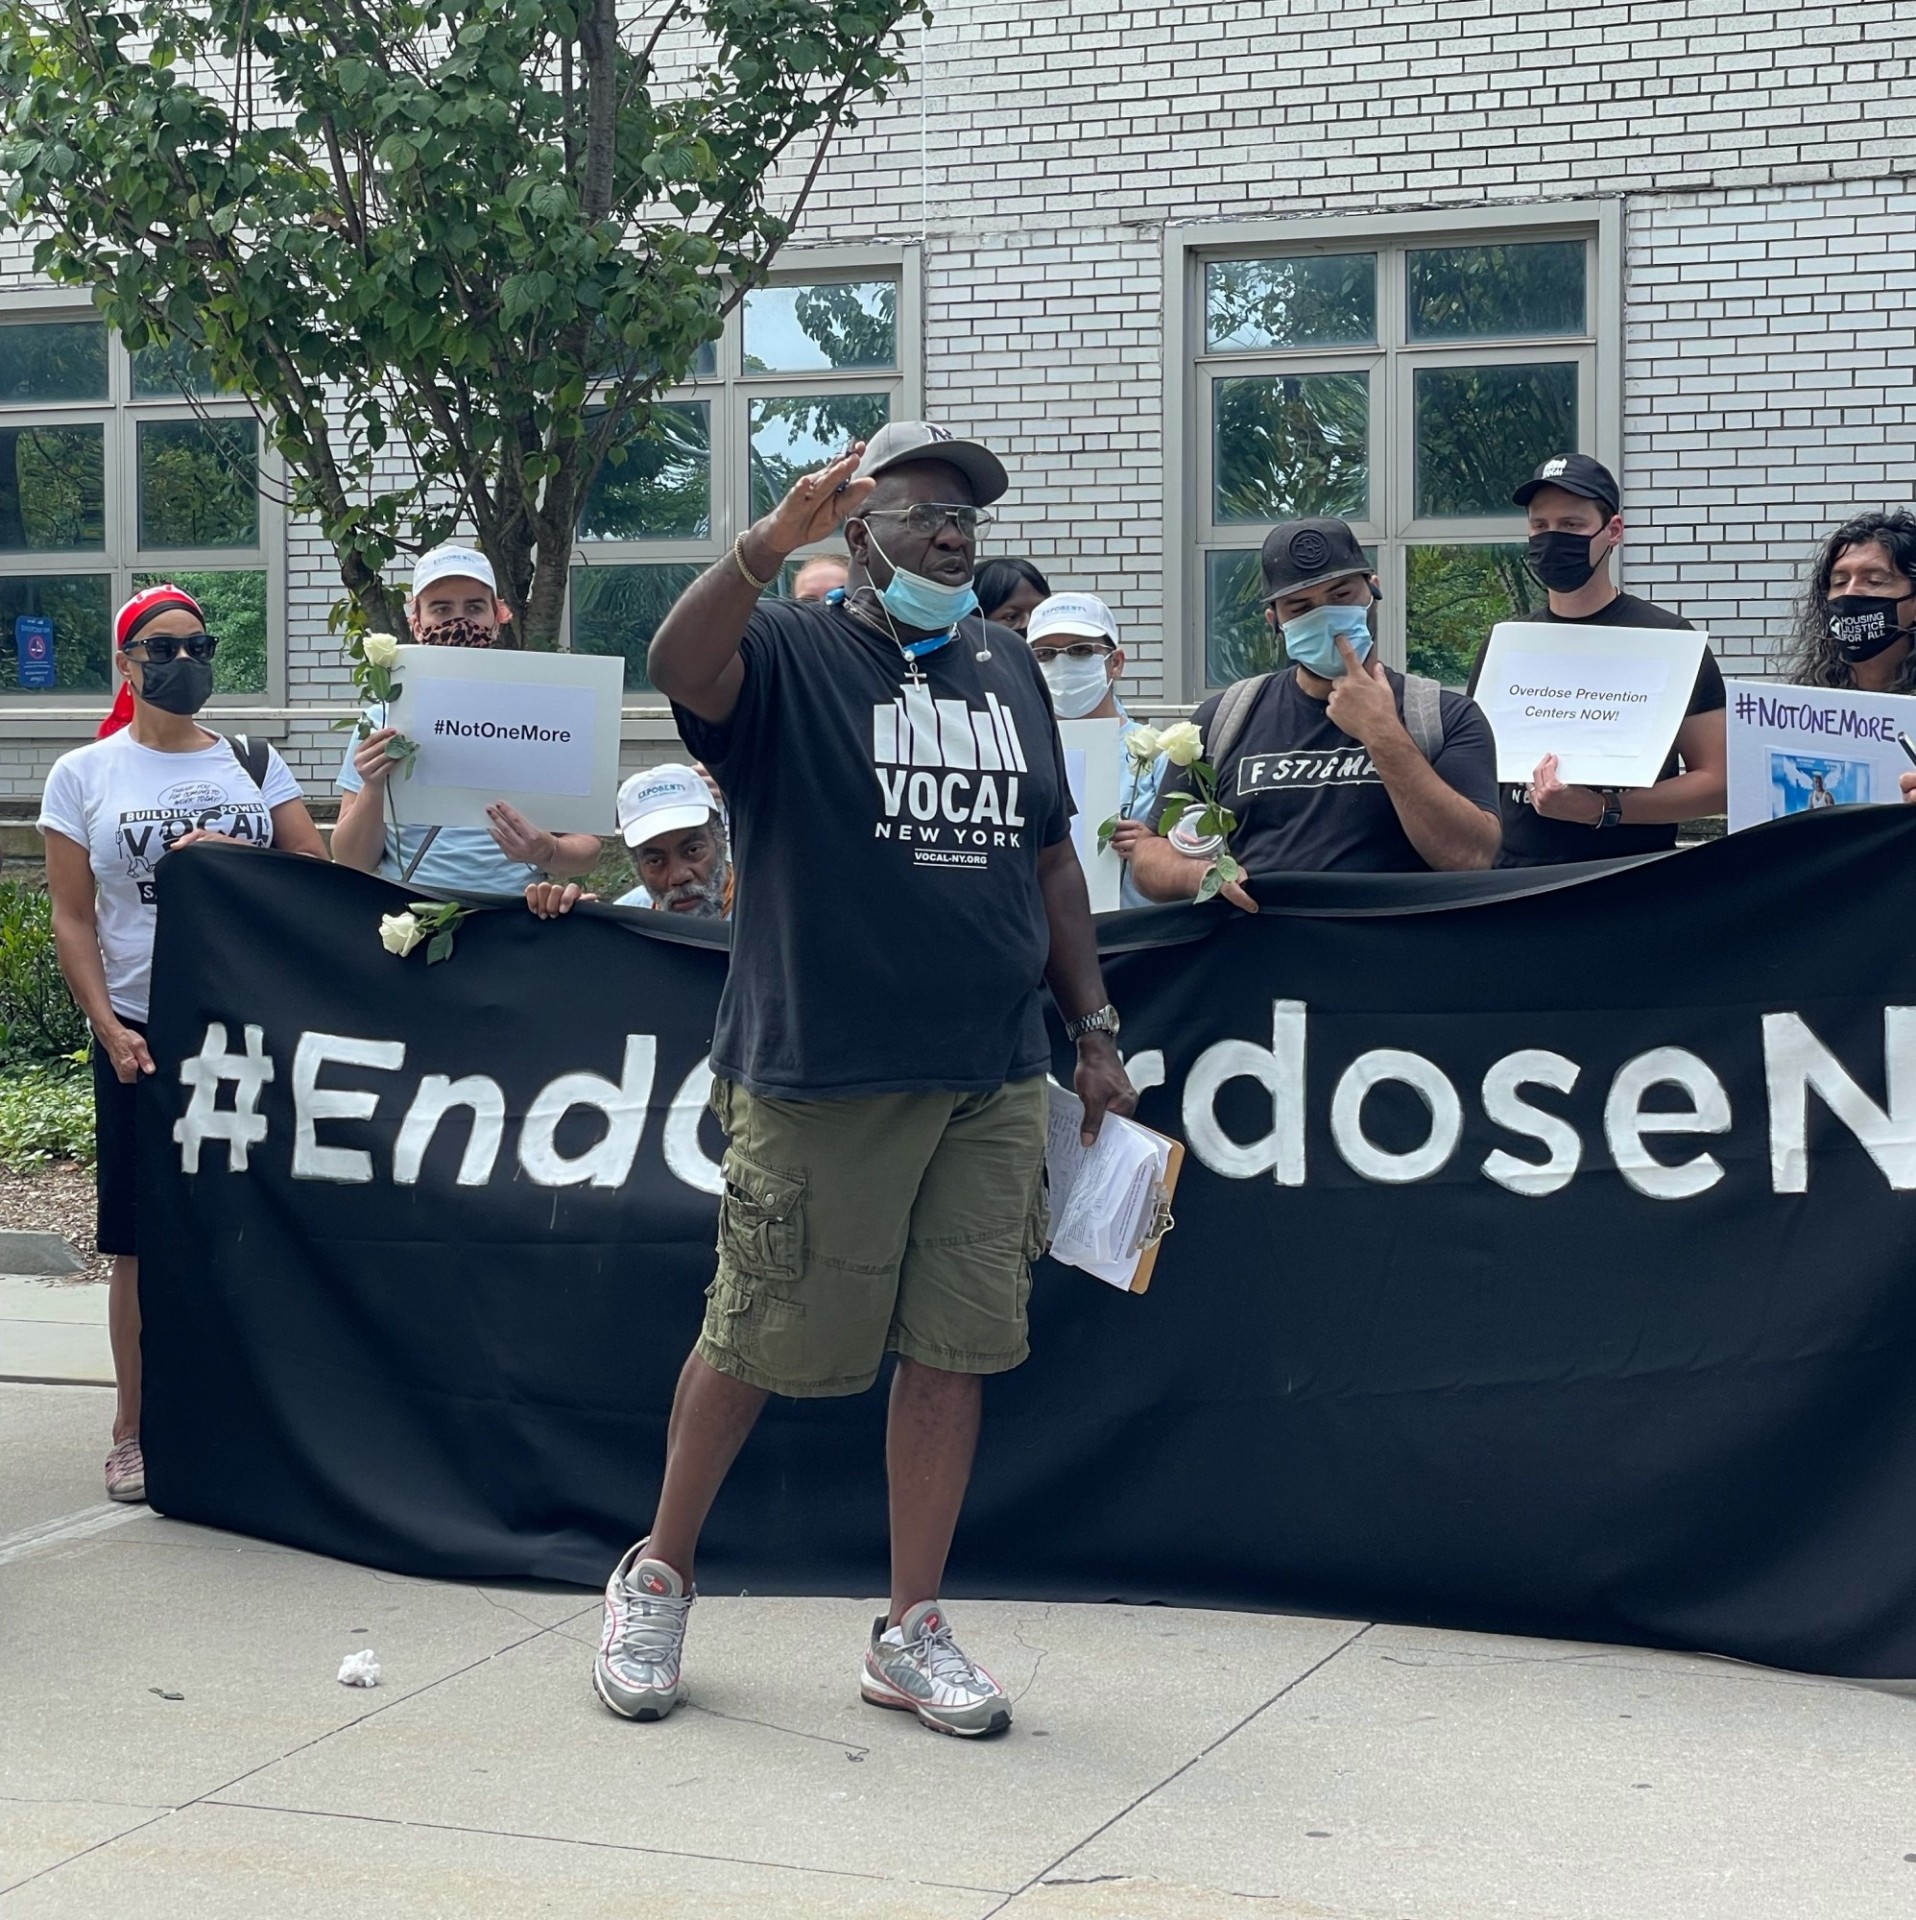 Will Robertson standing in front of group at overdose rally